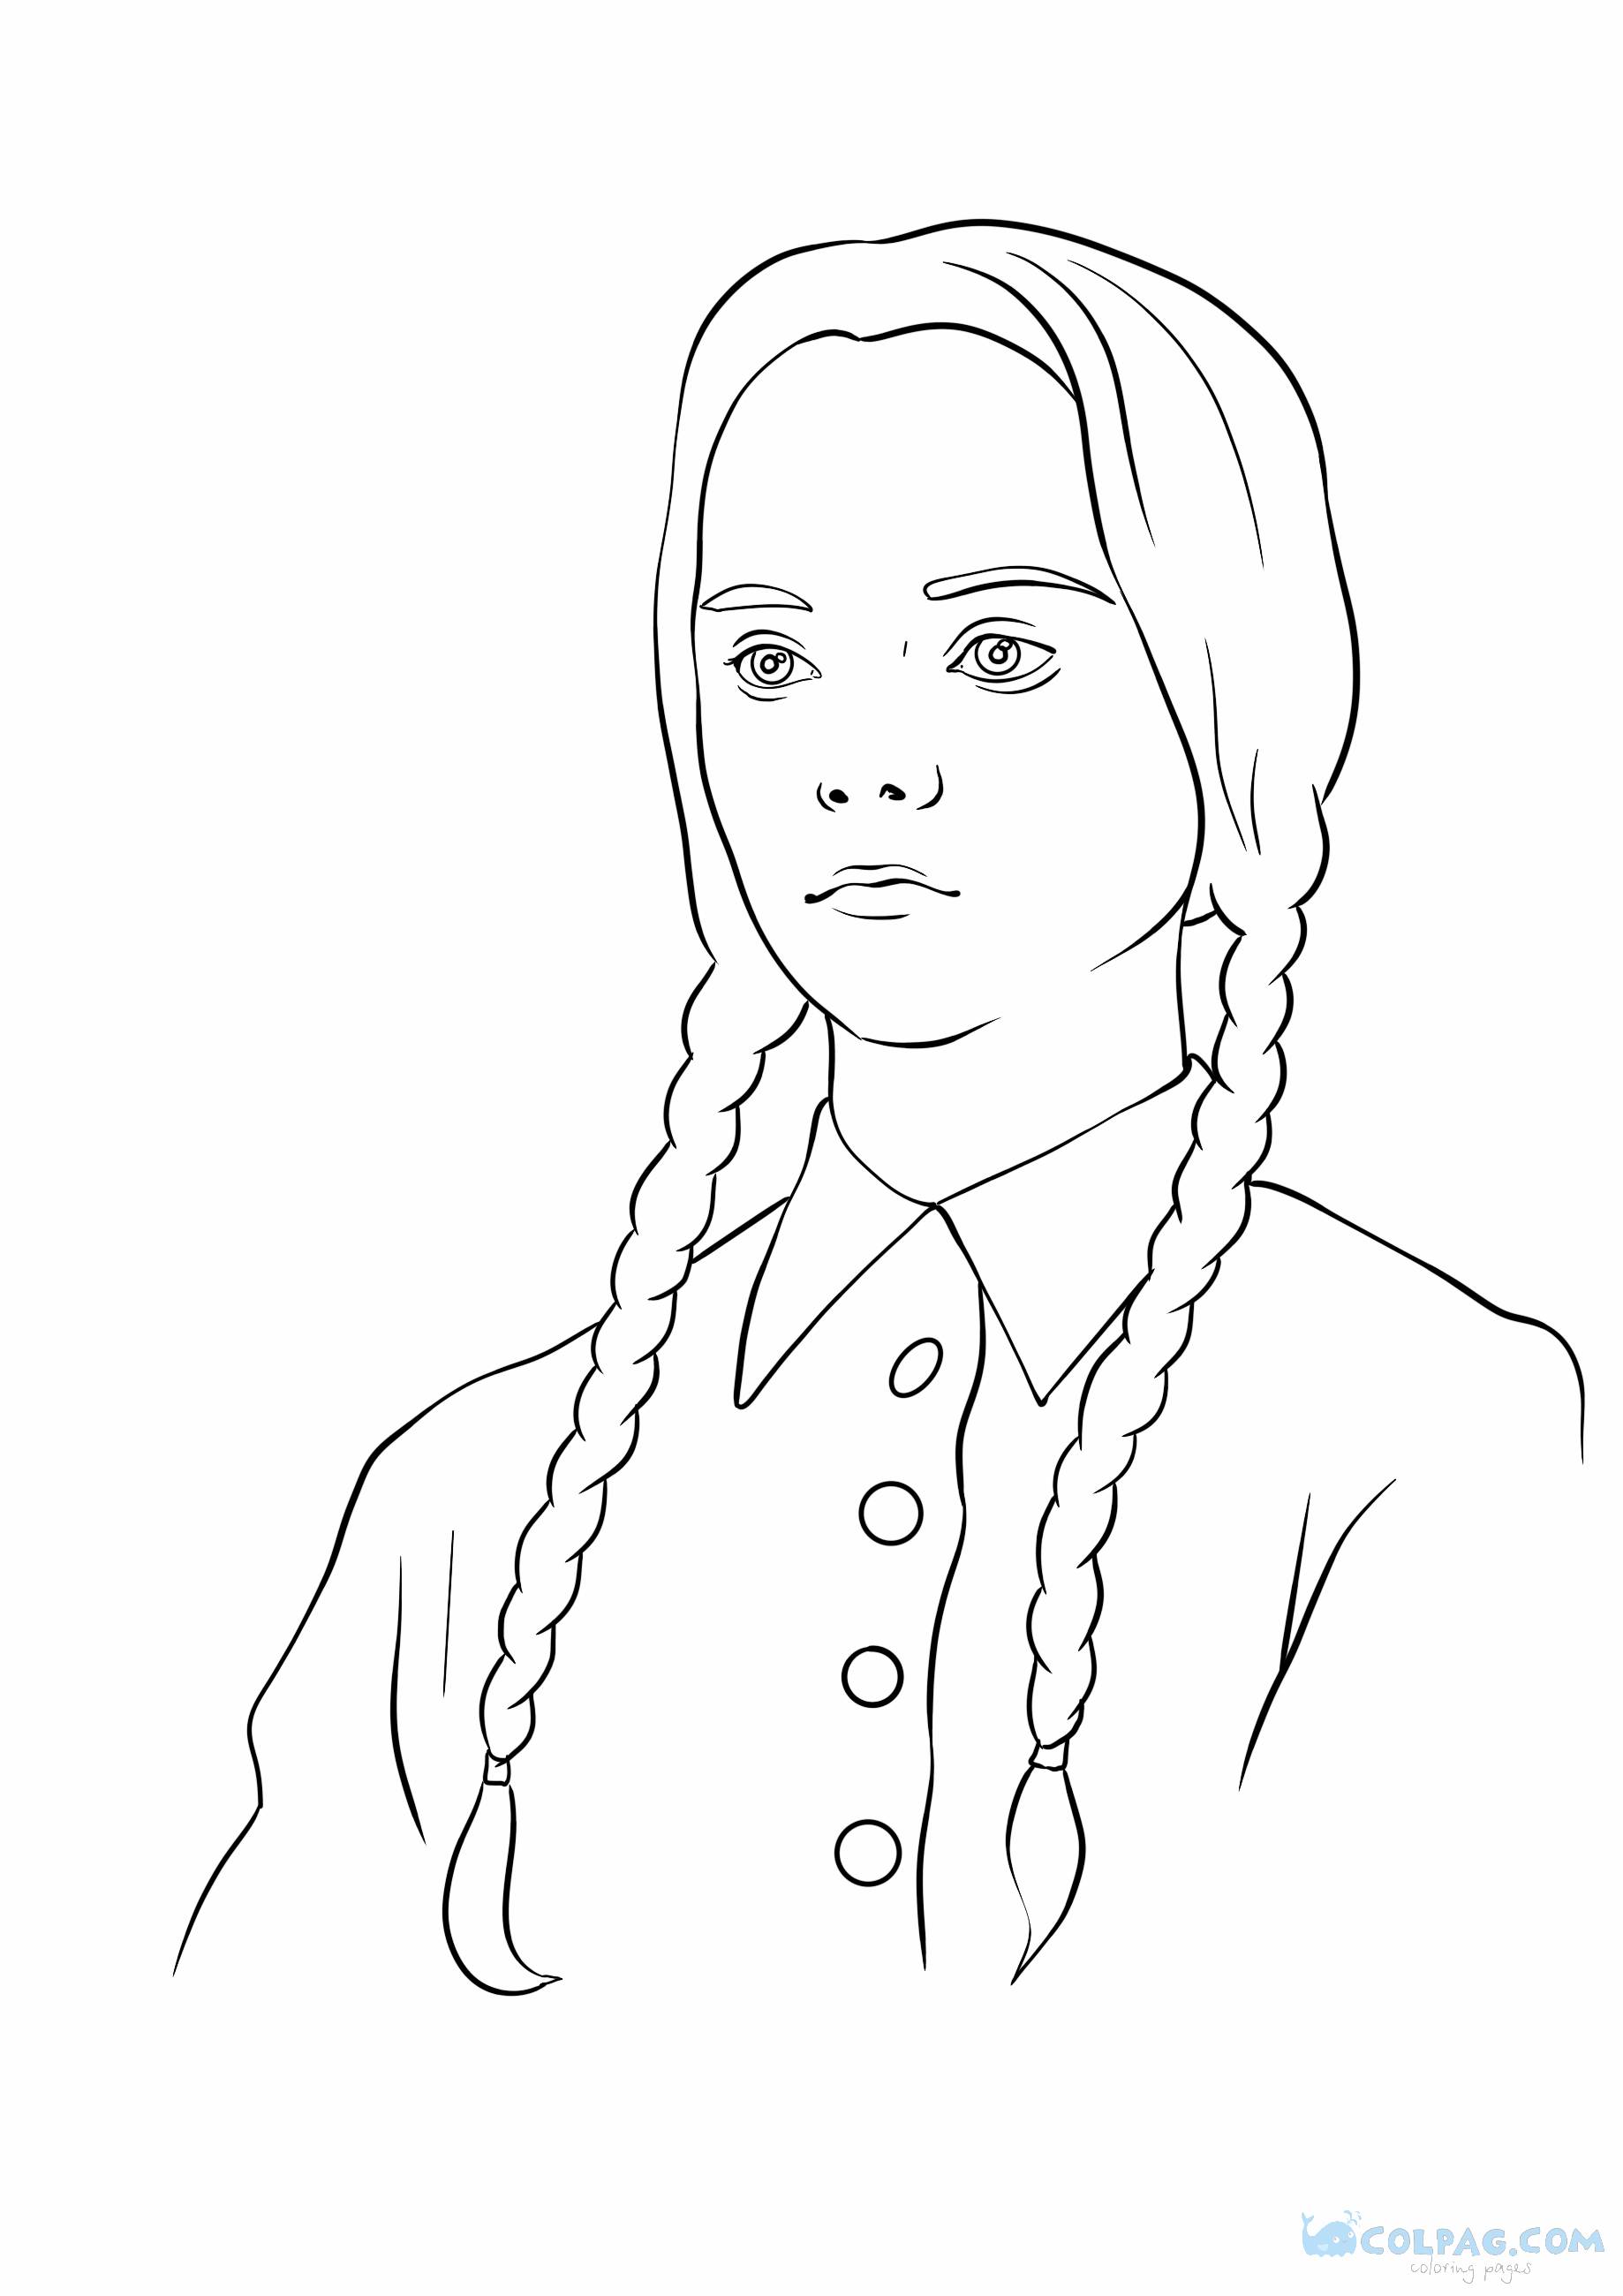 wednesday-addams-coloring-page-colpag-com-14